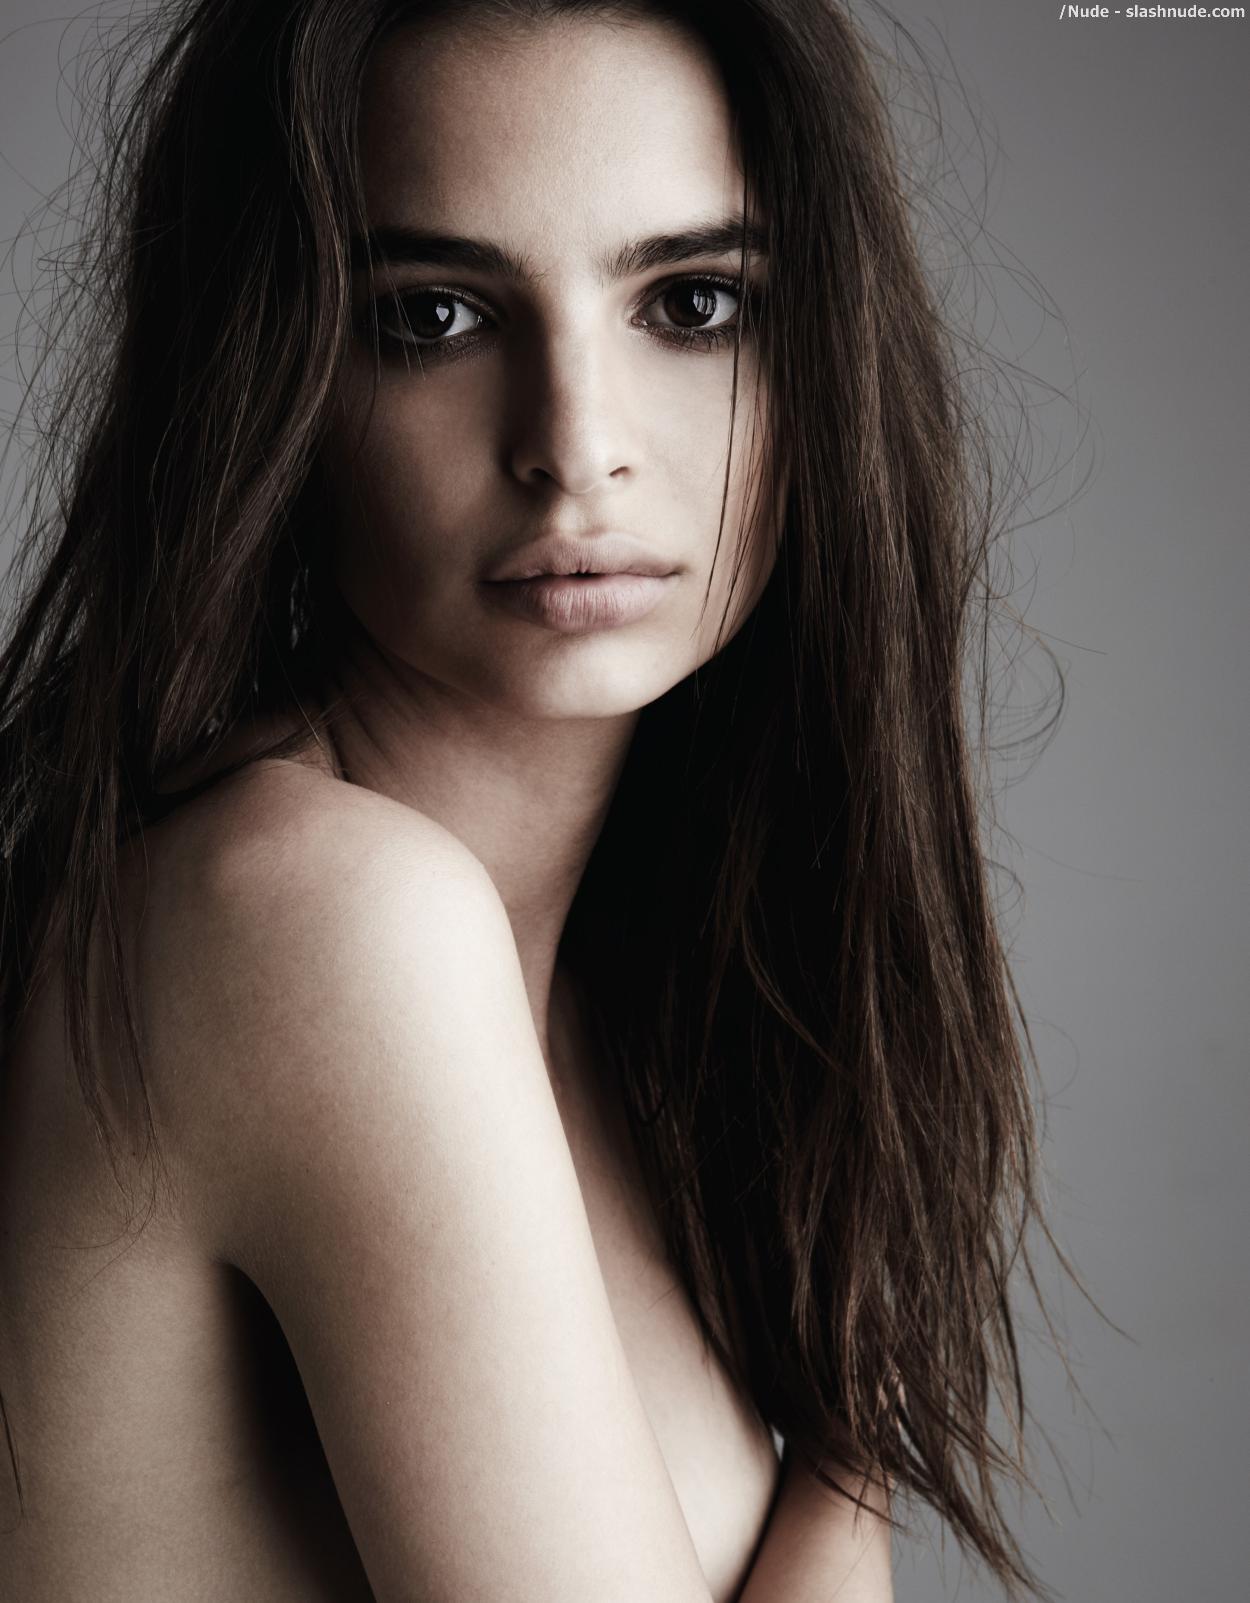 Emily Ratajkowski Nude From Top To Bottom Is A Treat 8